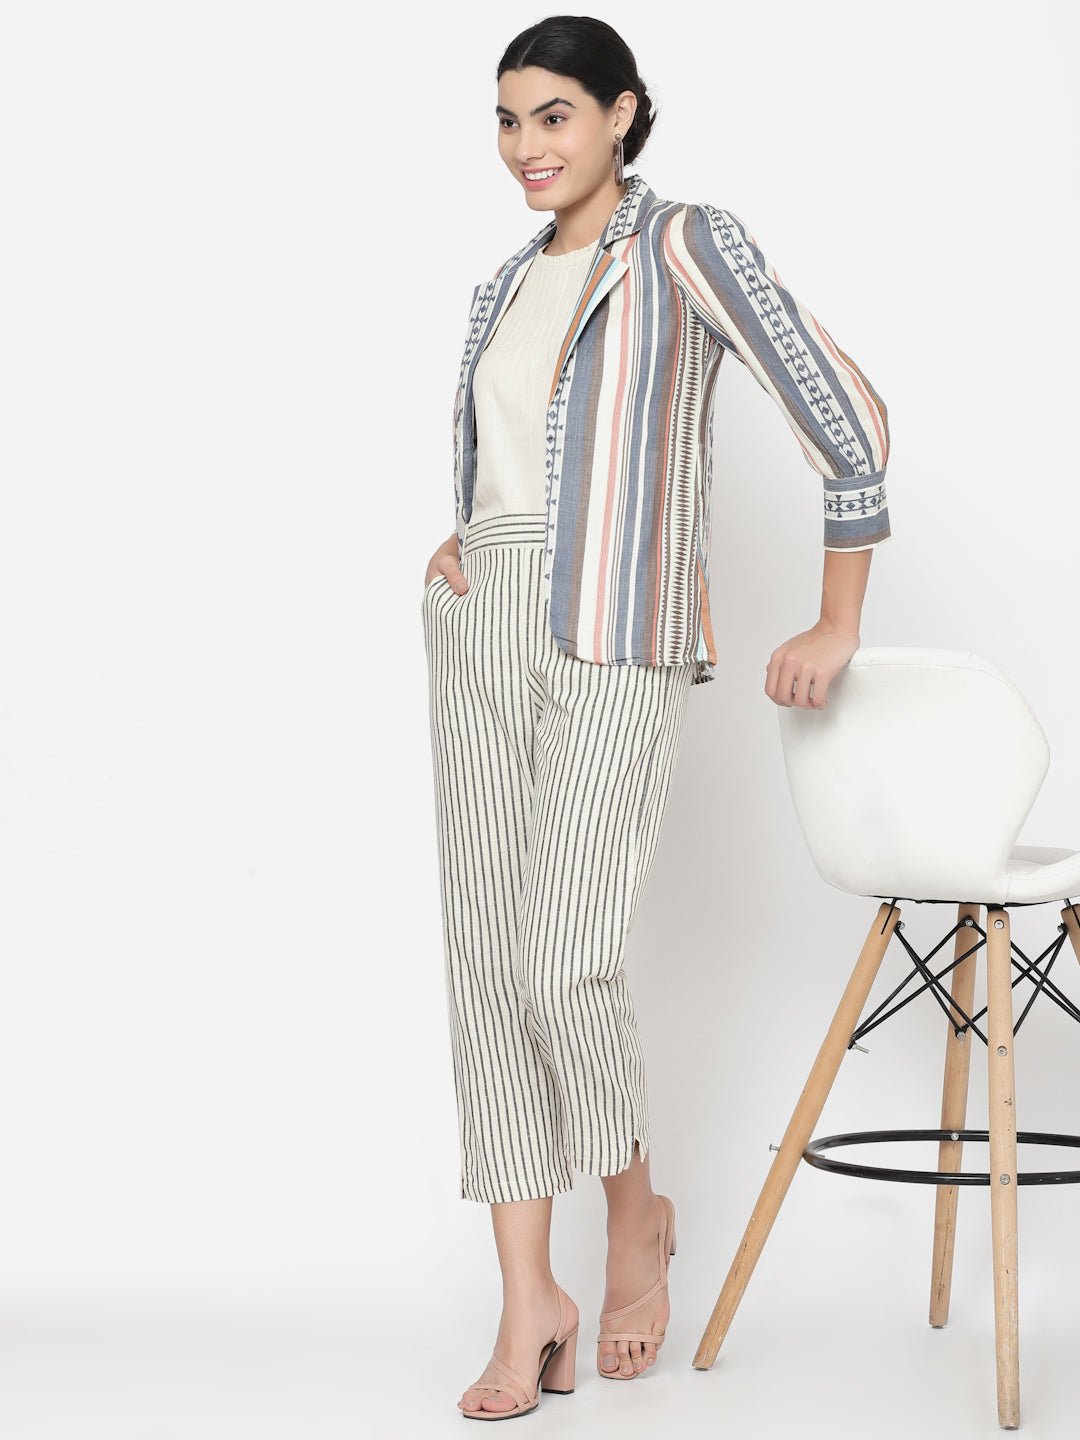 Three Piece Co-ord Set with Top, Striped Pants and Cotton Blazer - Dresses - APANAKAH